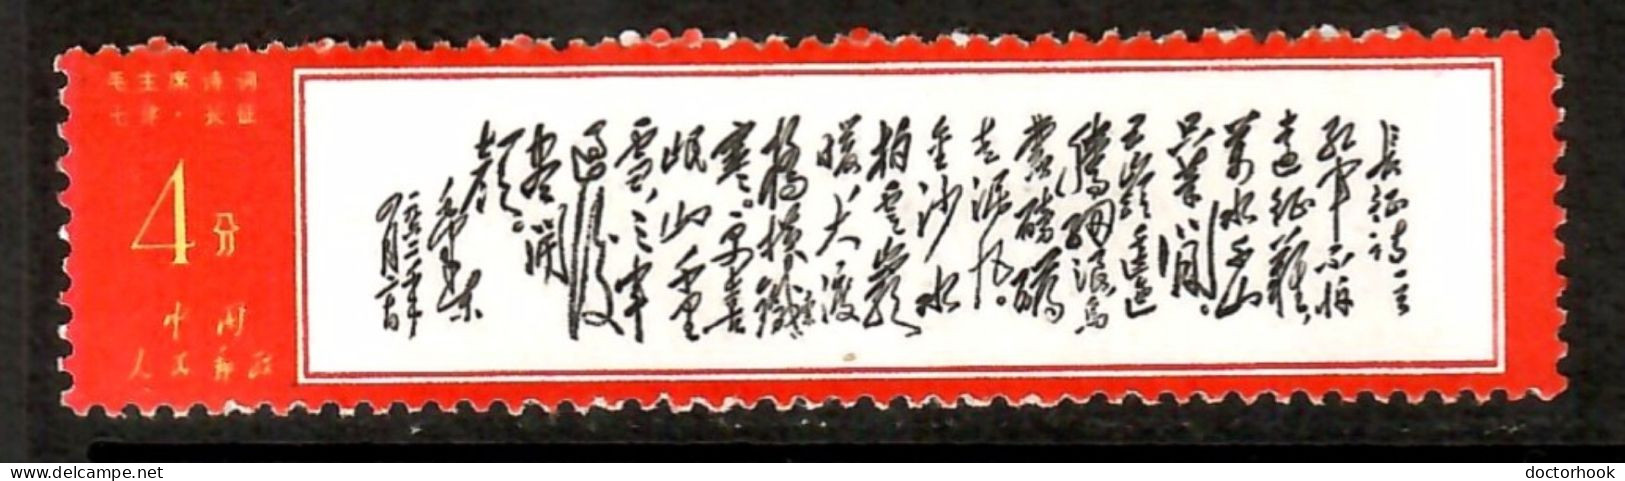 PEOPLES REPUBLIC Of CHINA   Scott # 967** MINT NH (CONDITION AS PER SCAN) (Stamp Scan # 1013-1) - Unused Stamps